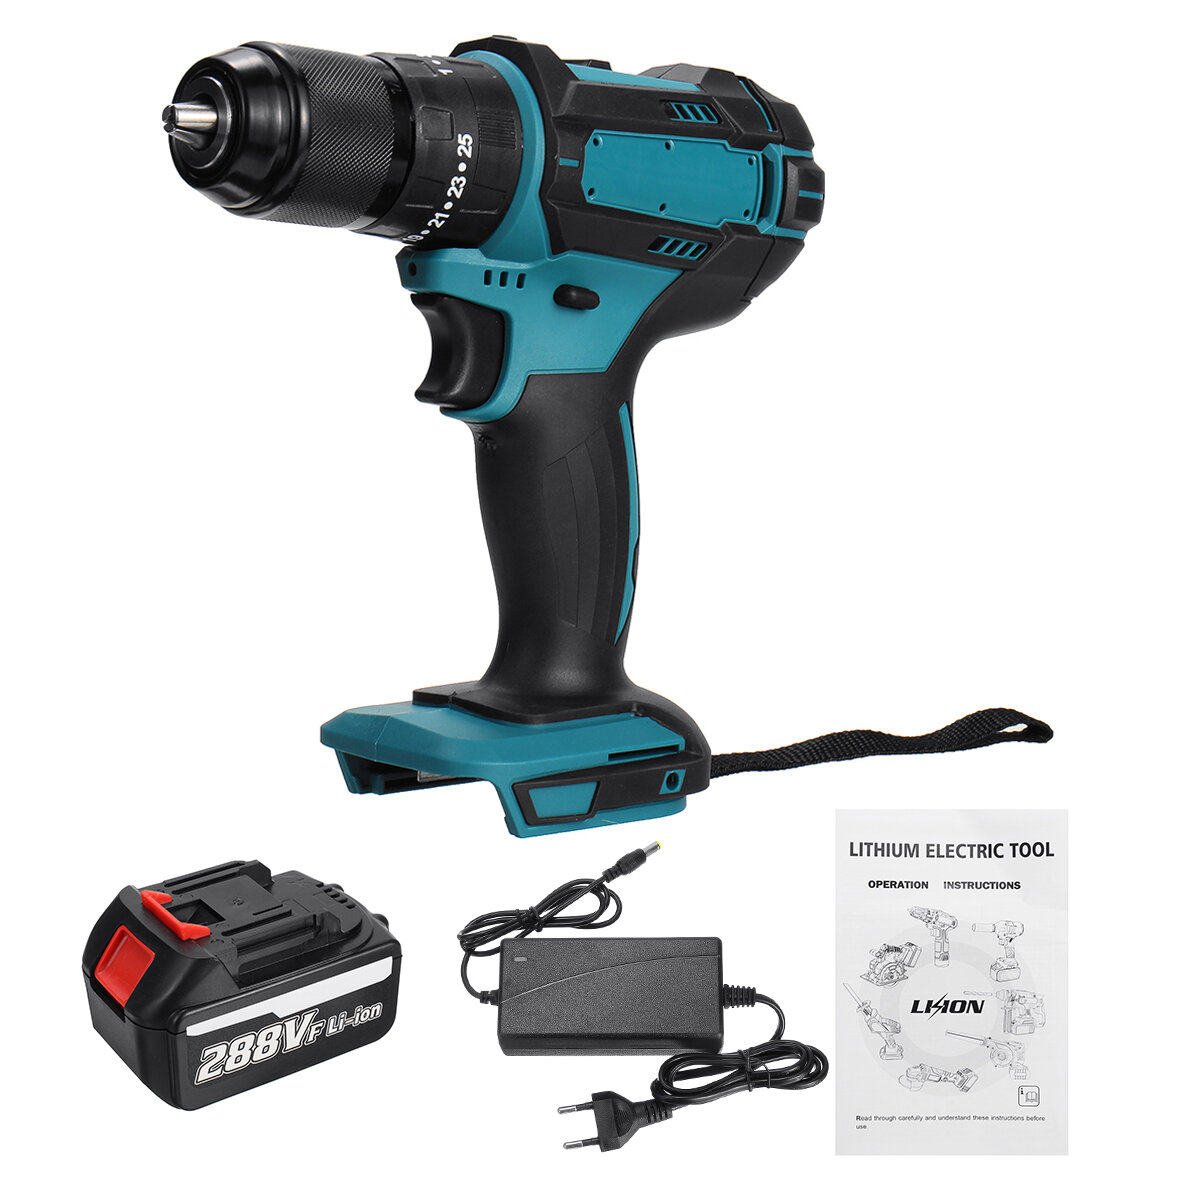 Wolike 13mm 800W Cordless Electirc Impact Drill Driver 25+3 Torque Electric Drill Screwdriver